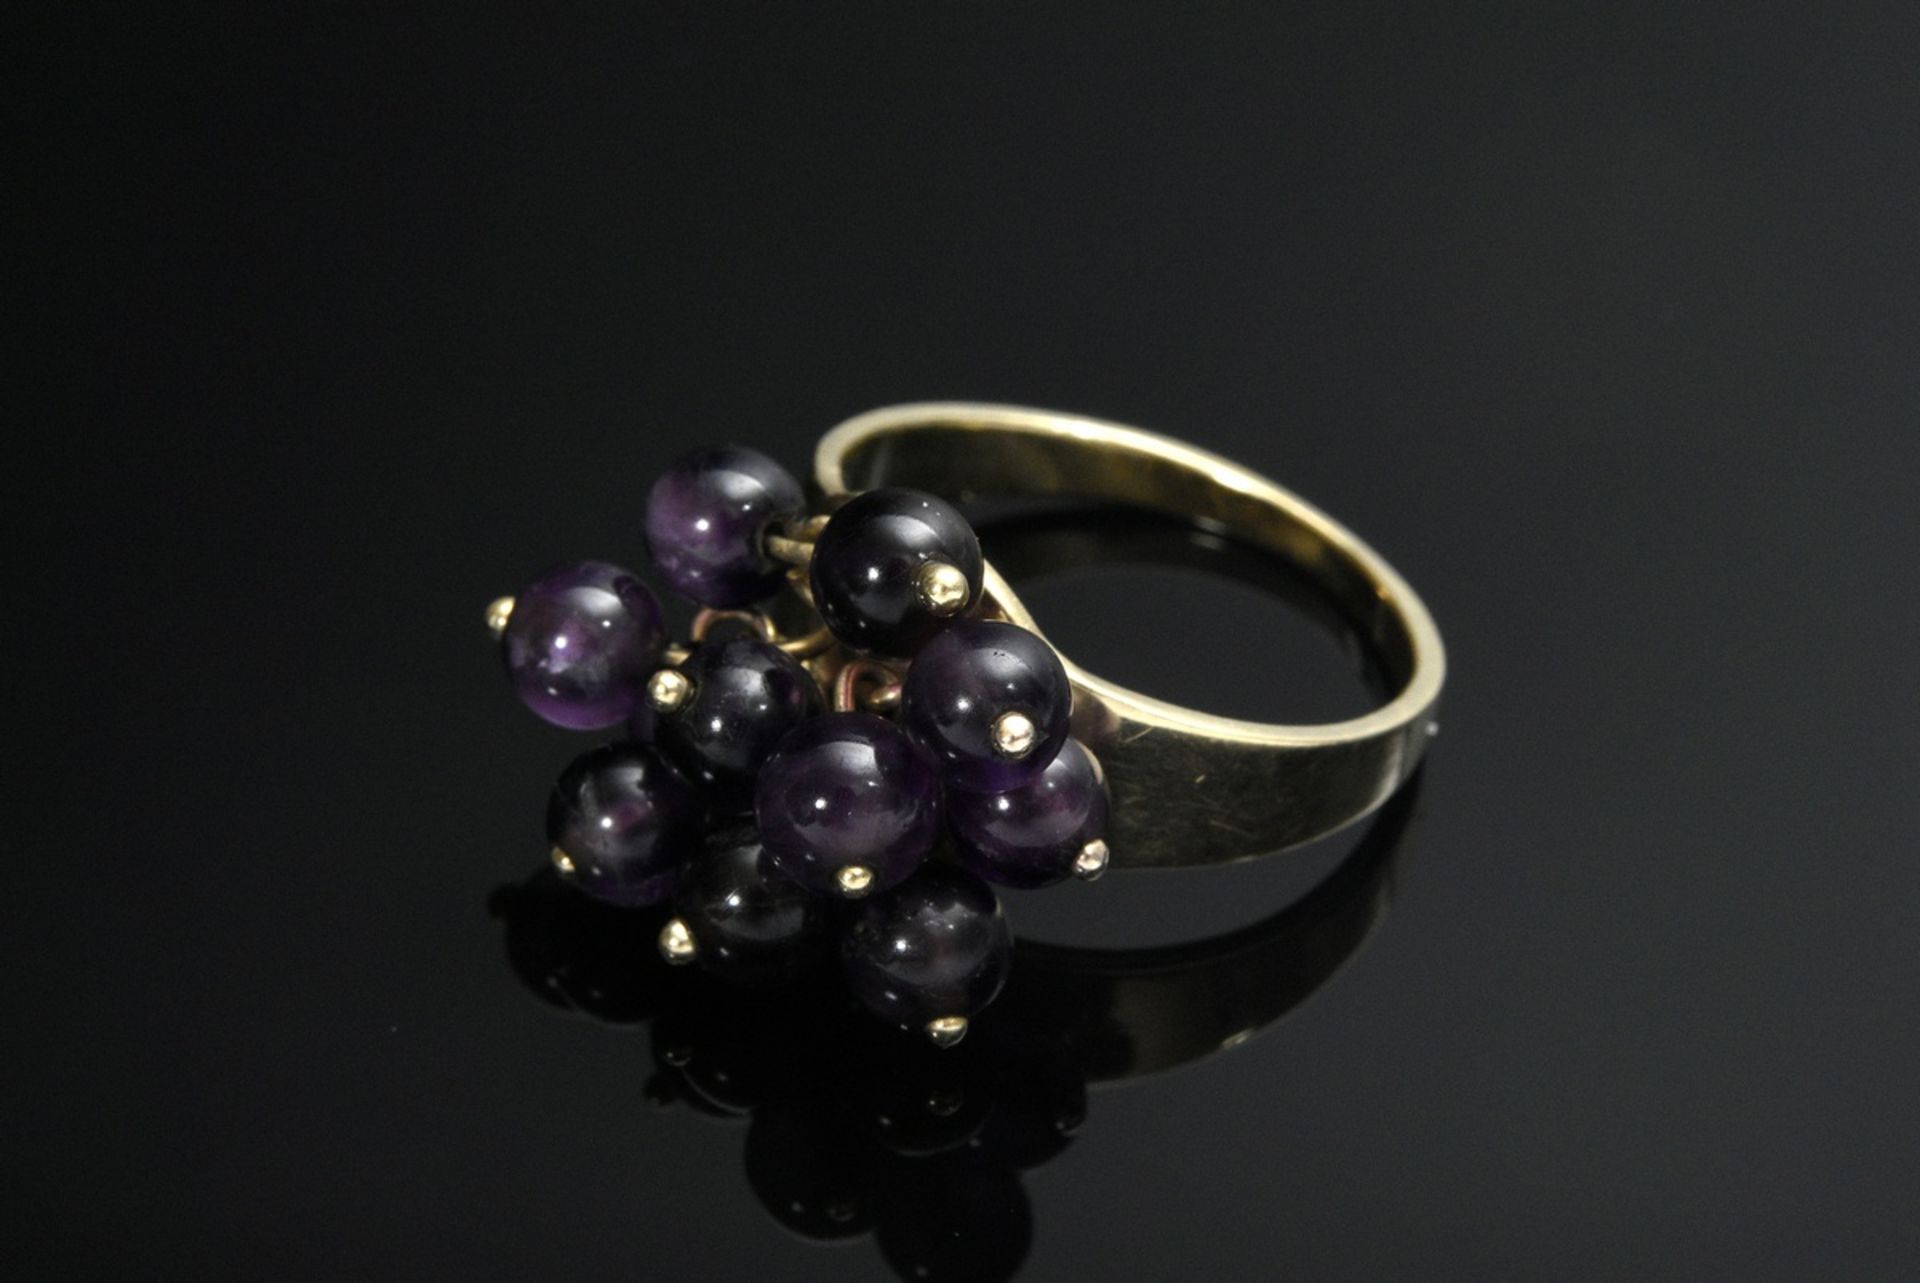 Yellow gold 585 ring with 11 movable amethyst beads, 5,5g, size 53 - Image 2 of 3